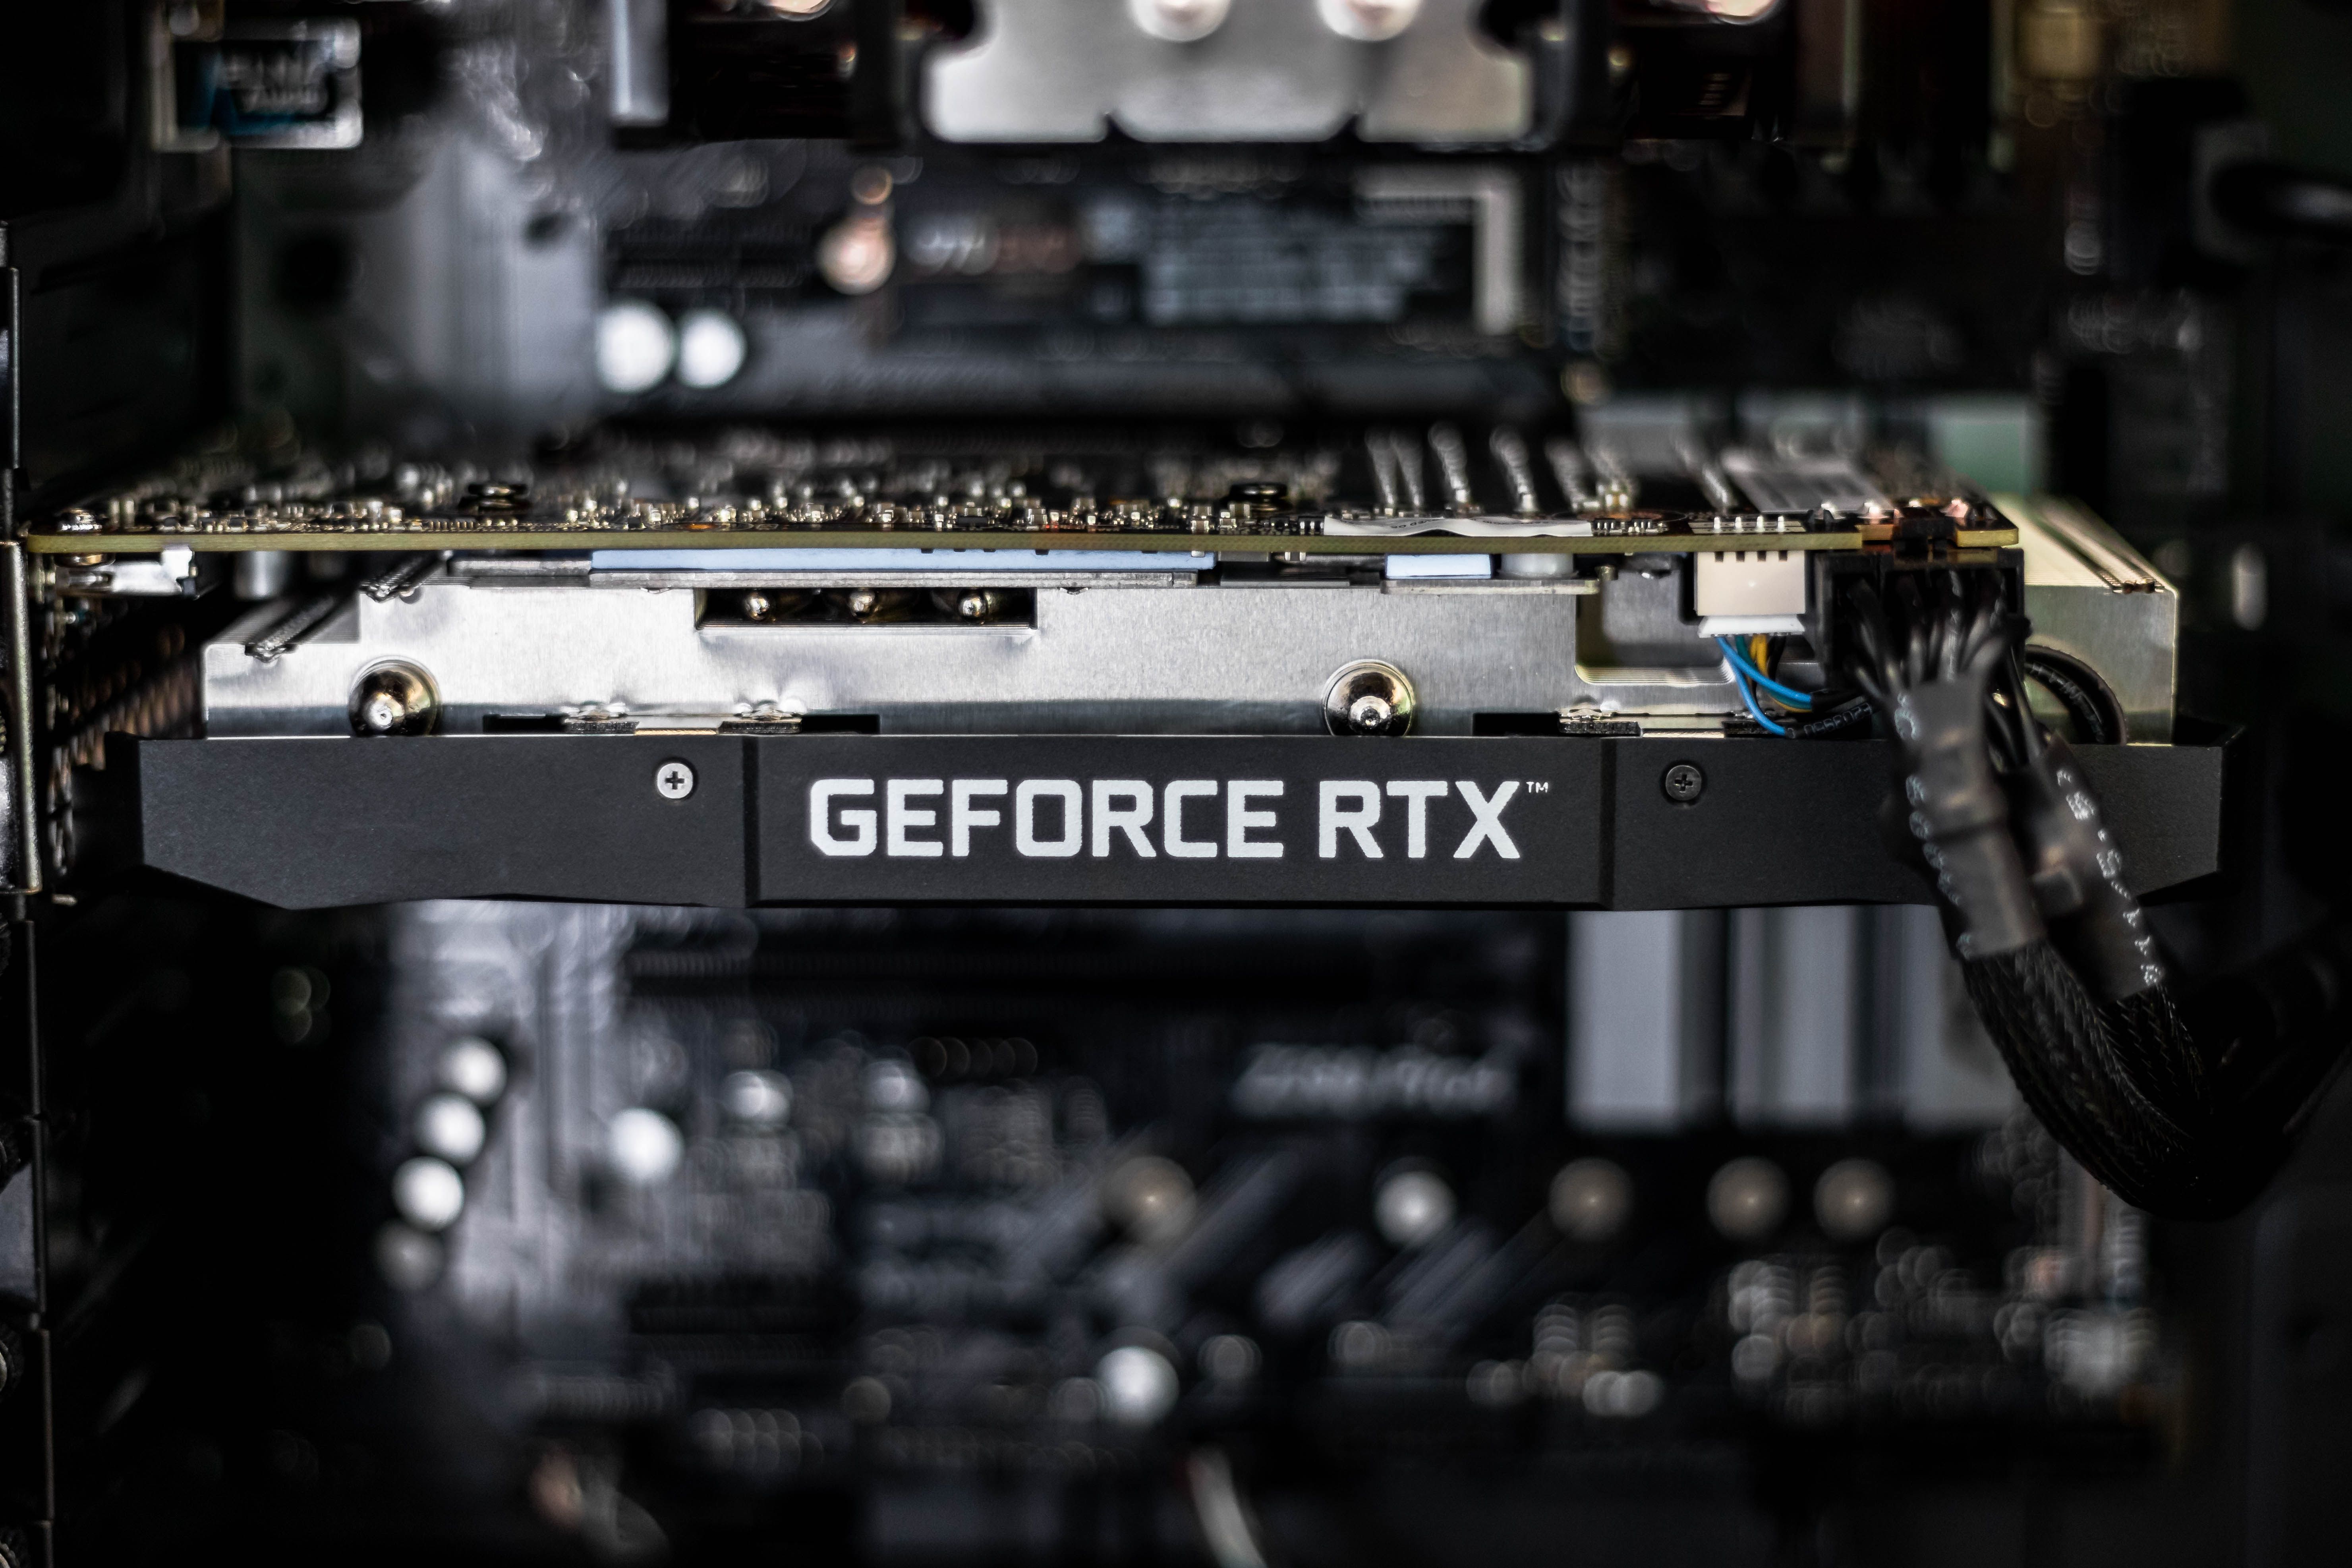 Geforce RTX Card Unlabeled Installed